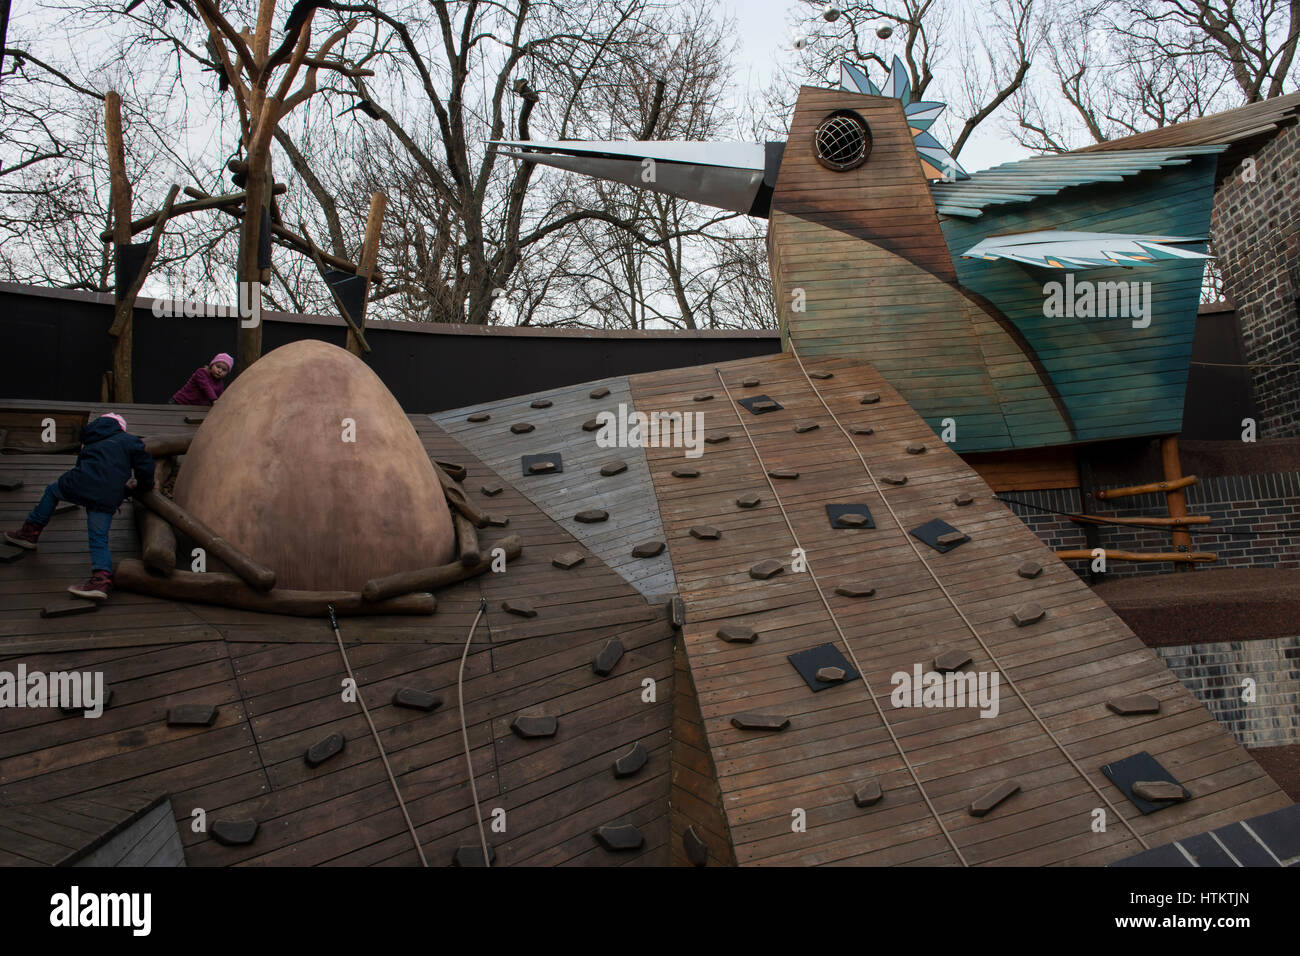 Children climbing on a wooden outdoor playground in the Leipzig Zoological Garden, Leipzig, Saxony, Germany. Stock Photo